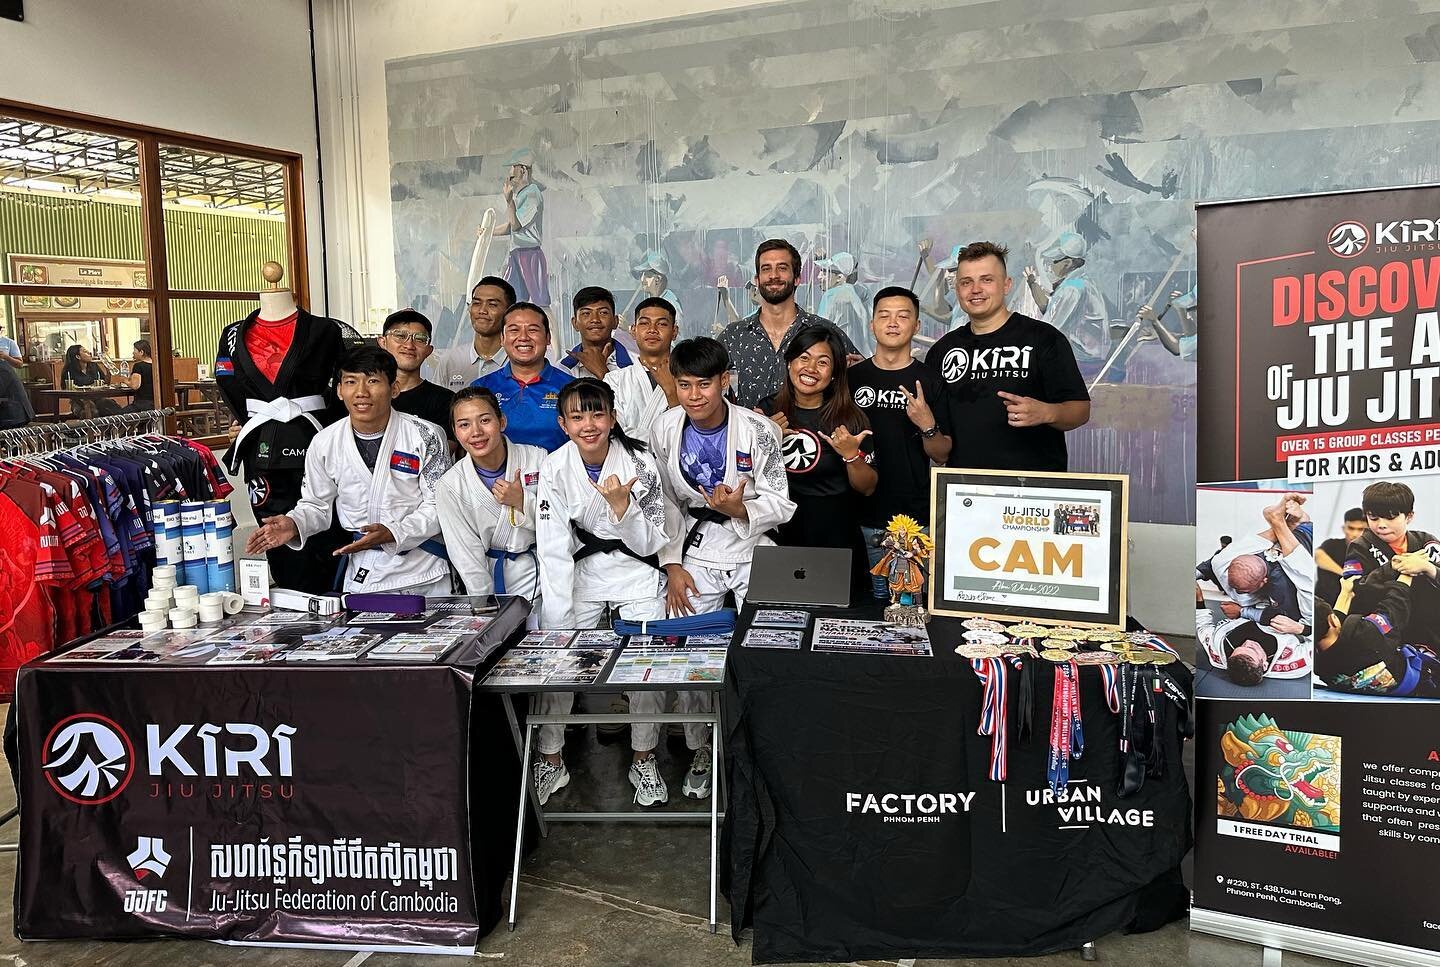 Check us out at the @fitness.festival.pp today!! 

.

* 𝐅𝐑𝐄𝐄 𝐓𝐑𝐈𝐀𝐋* come train with us first to see if you like it! Beginner friendly ✔️
.
.
Check out our website at www.kiri-jiujitsu.com for more info or message us with any questions.
.
Loc